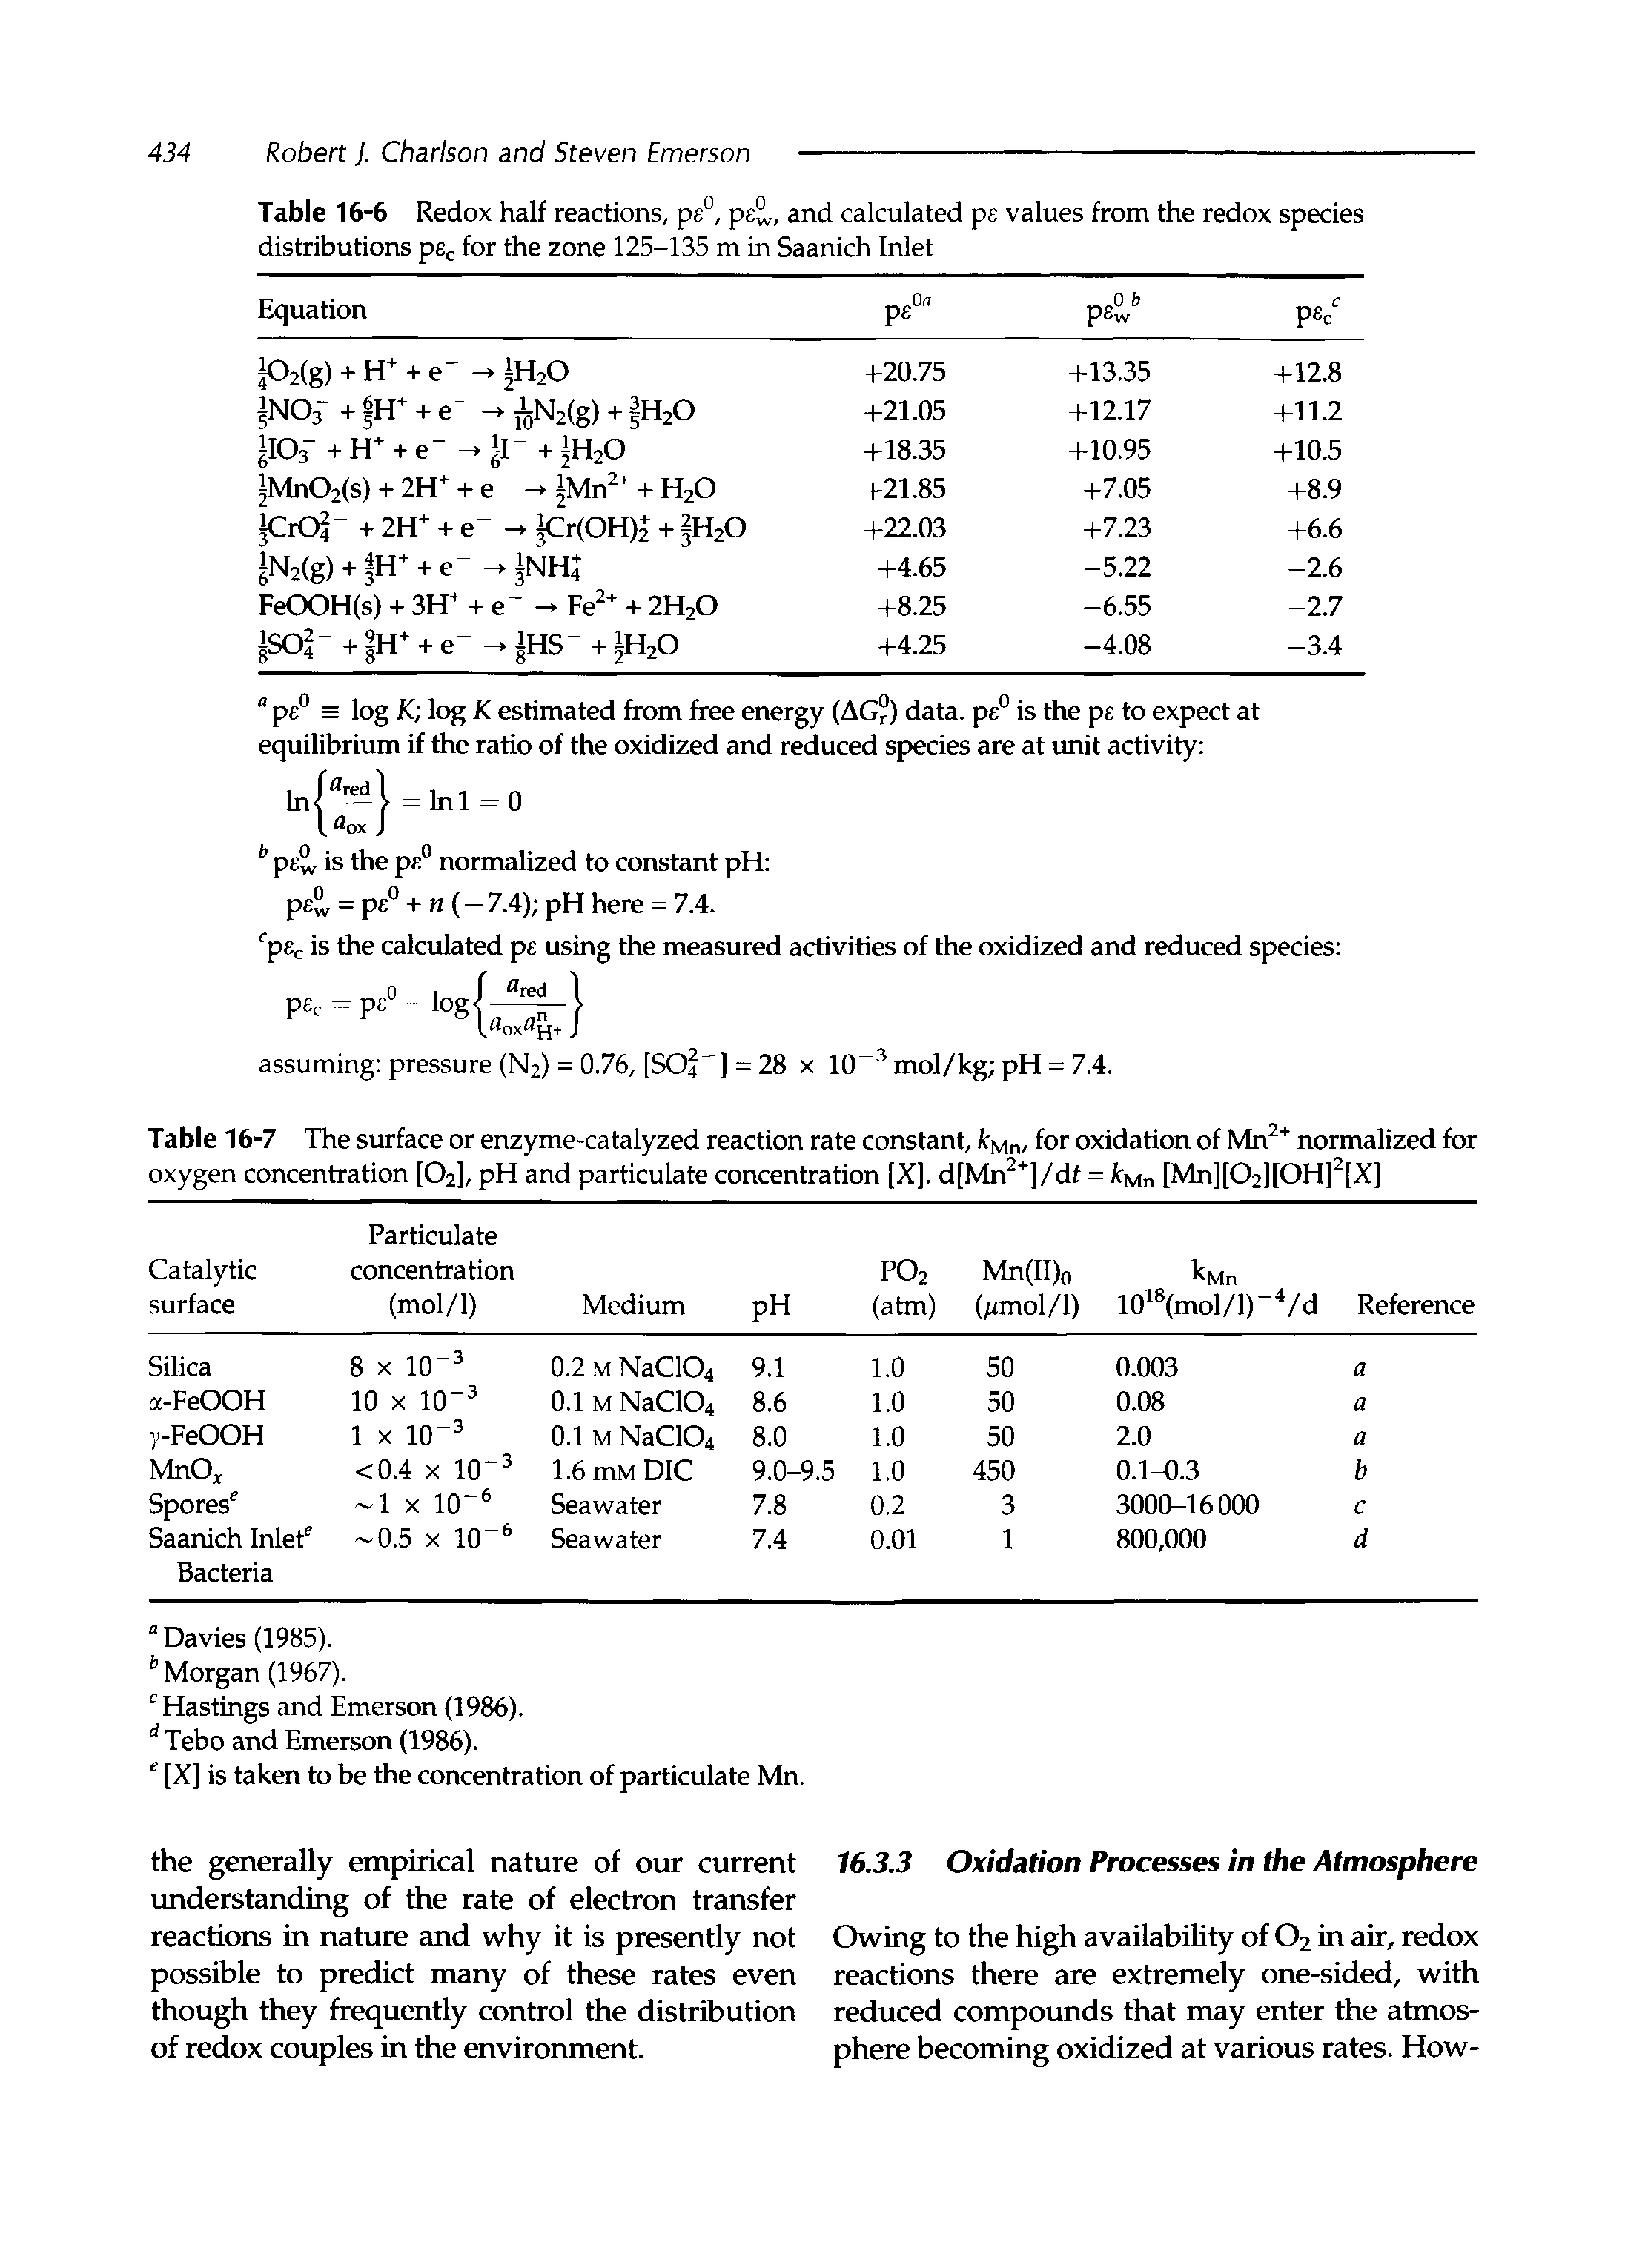 Table 16-6 Redox half reactions, pg°, pe, and calculated pe values from the redox species distributions psc for the zone 125-135 m in Saanich Inlet...